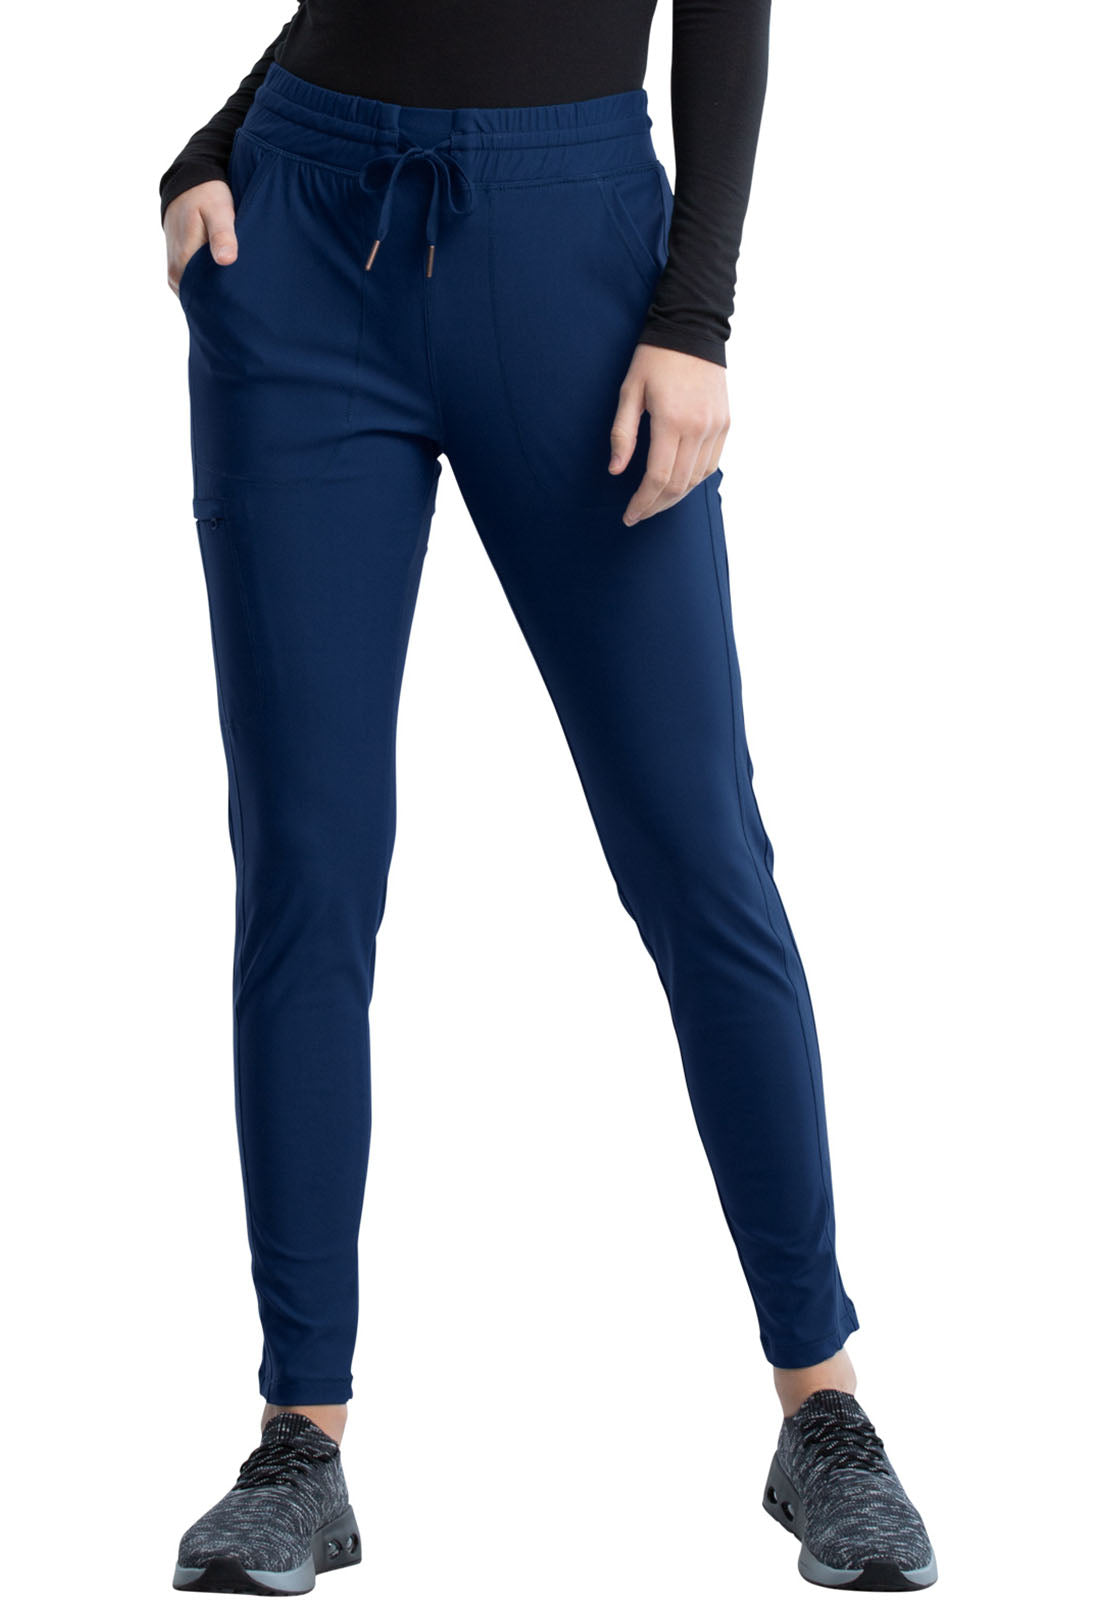 J.Crew Check Athletic Pants for Women